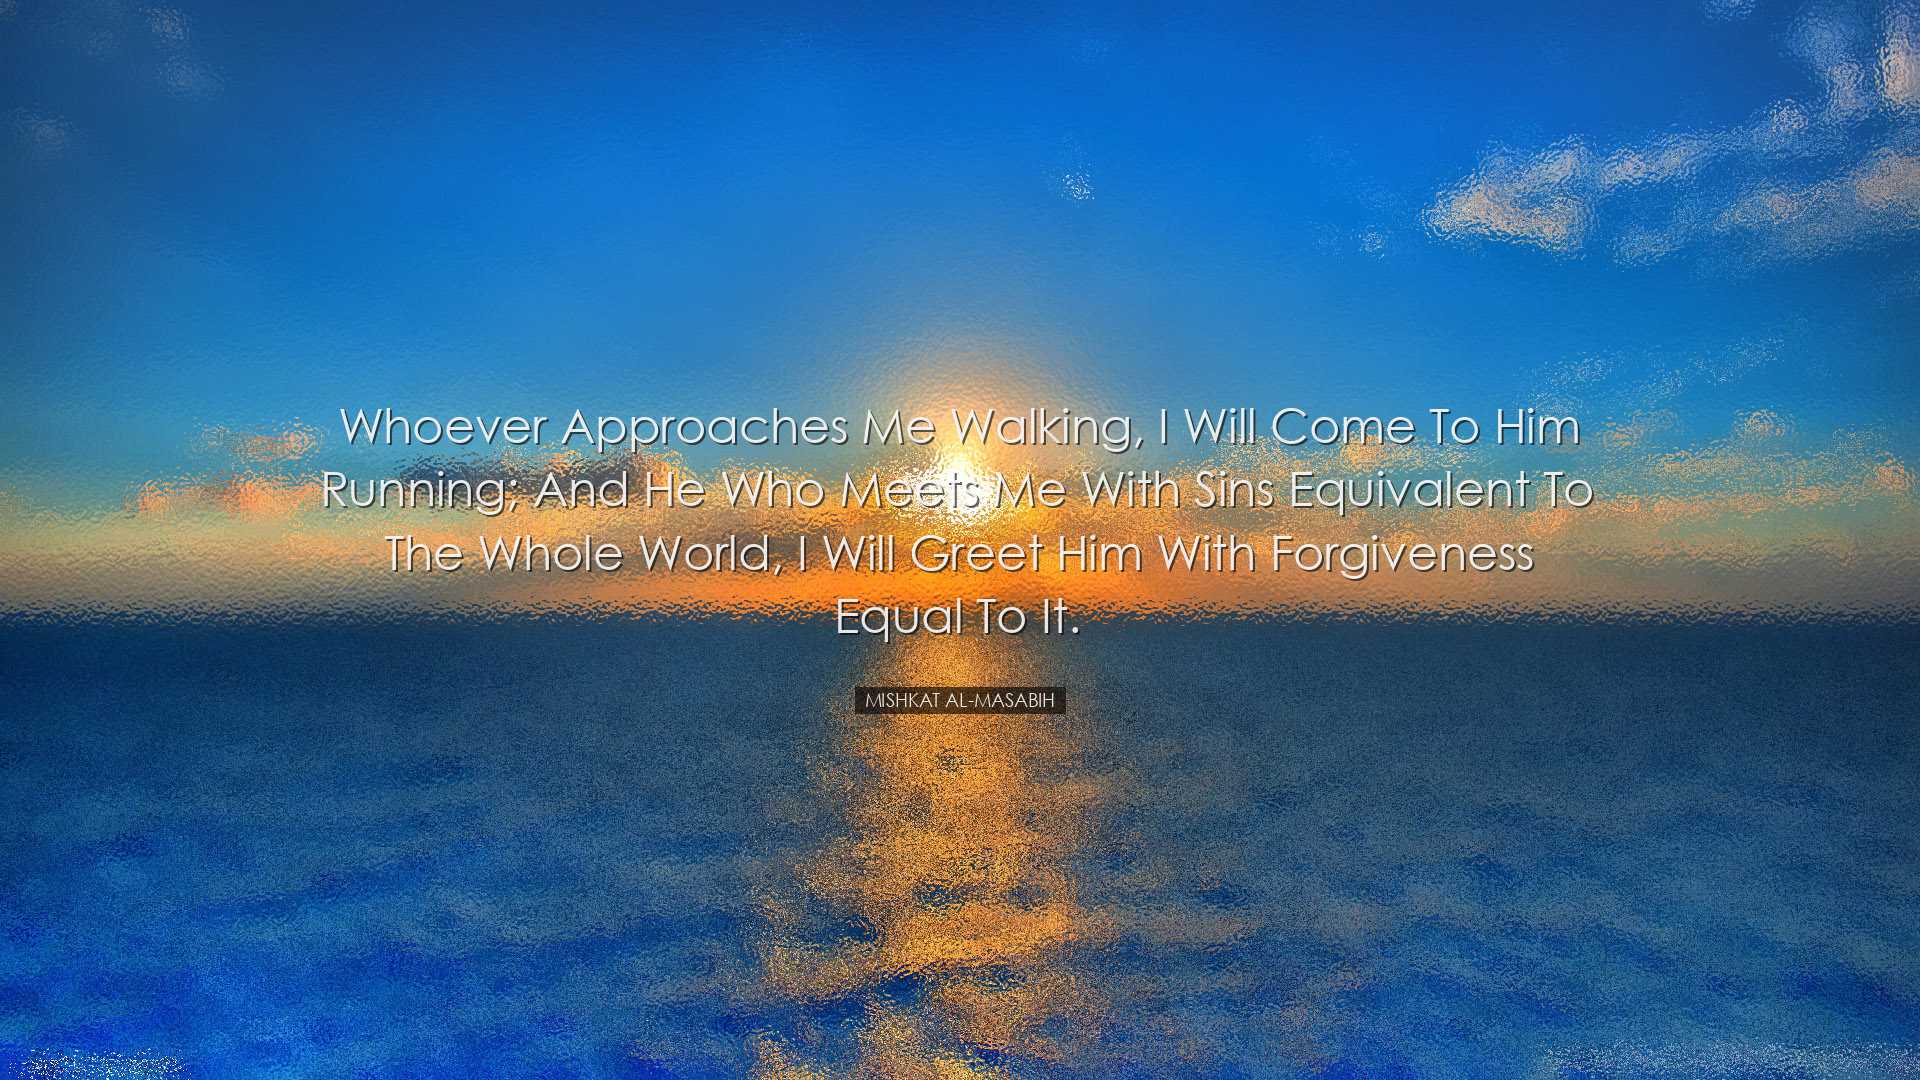 Whoever approaches Me walking, I will come to him running; and he